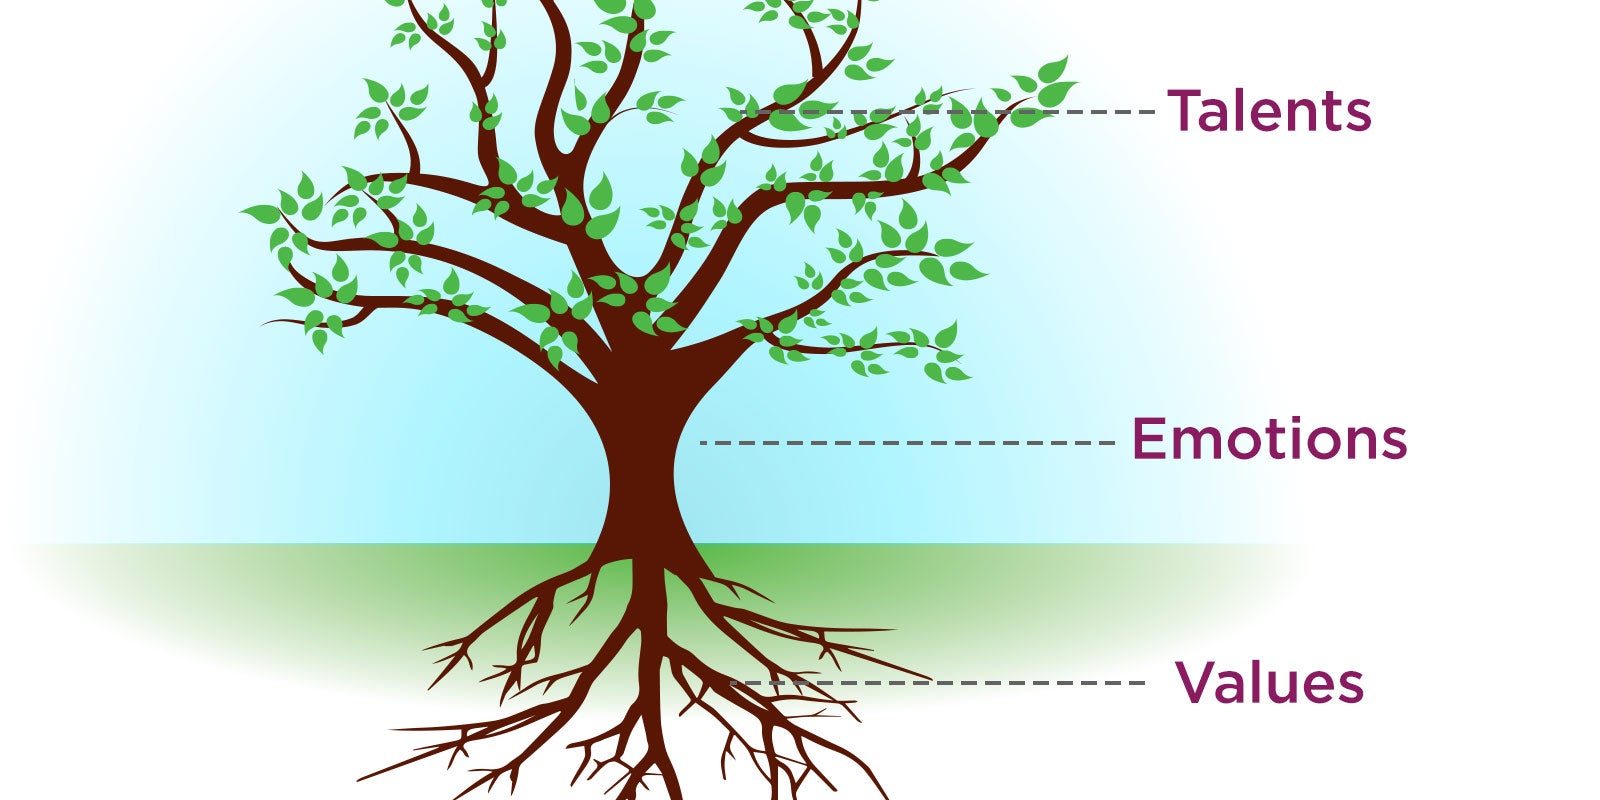 animated image of a tree with the word talents pointing from the branches, emotions pointing from the trunk, and values at the roots to show the three focus areas for improving self-awareness and resilience